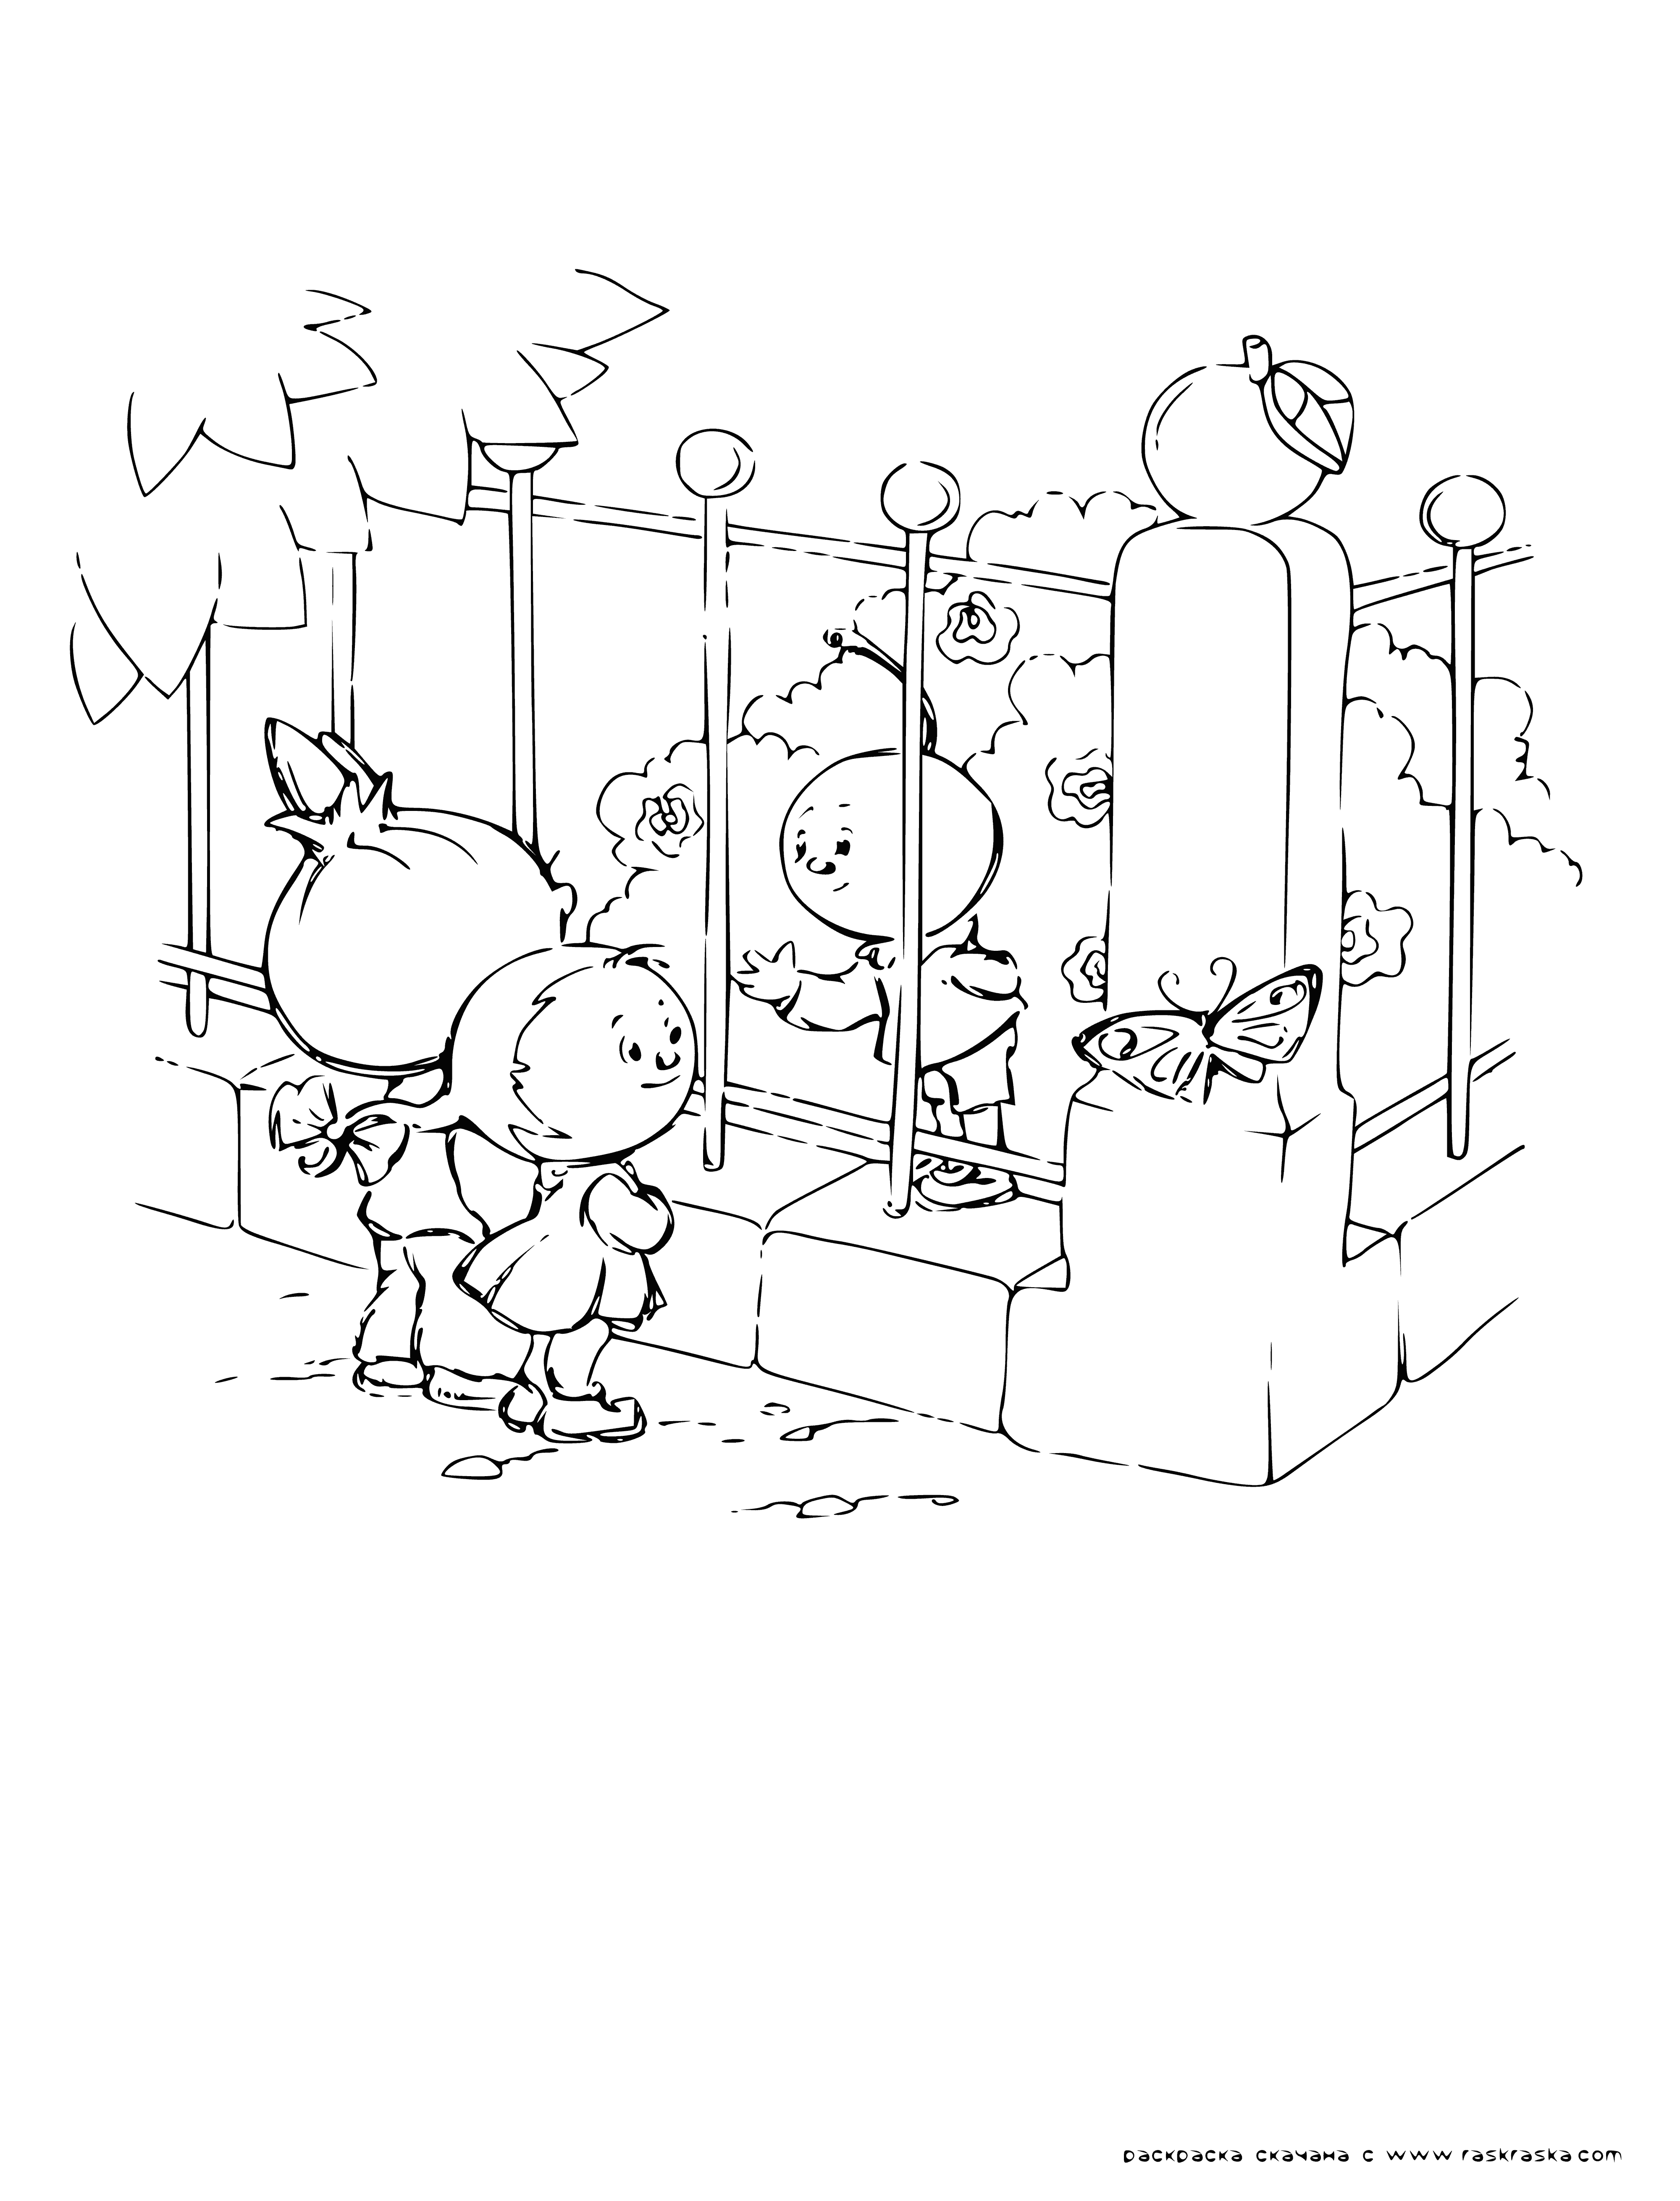 coloring page: In Gianni Rodari's "The Adventures of Cipollino", Cipollino and Radish are always saving each other from danger, happily depicted here.